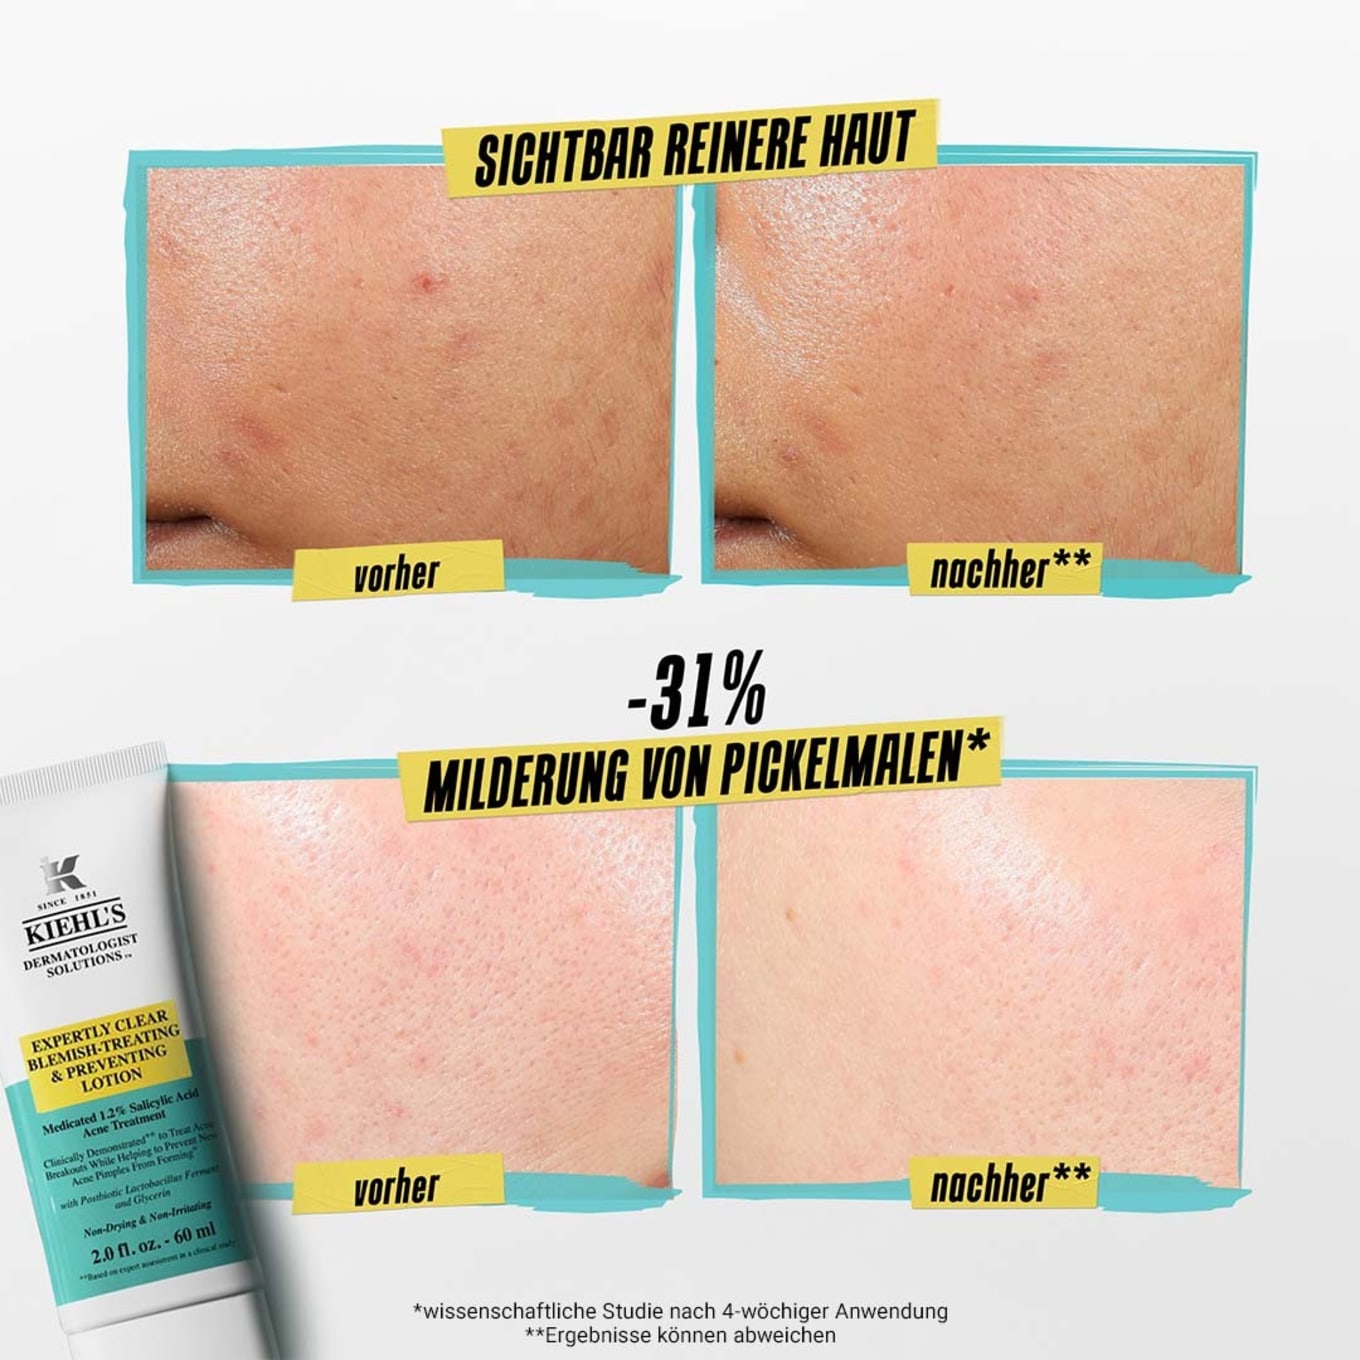 Kiehl's EXPERTLY CLEAR BLEMISH TREATING & PREVENTING LOTION (Obrazek 6)